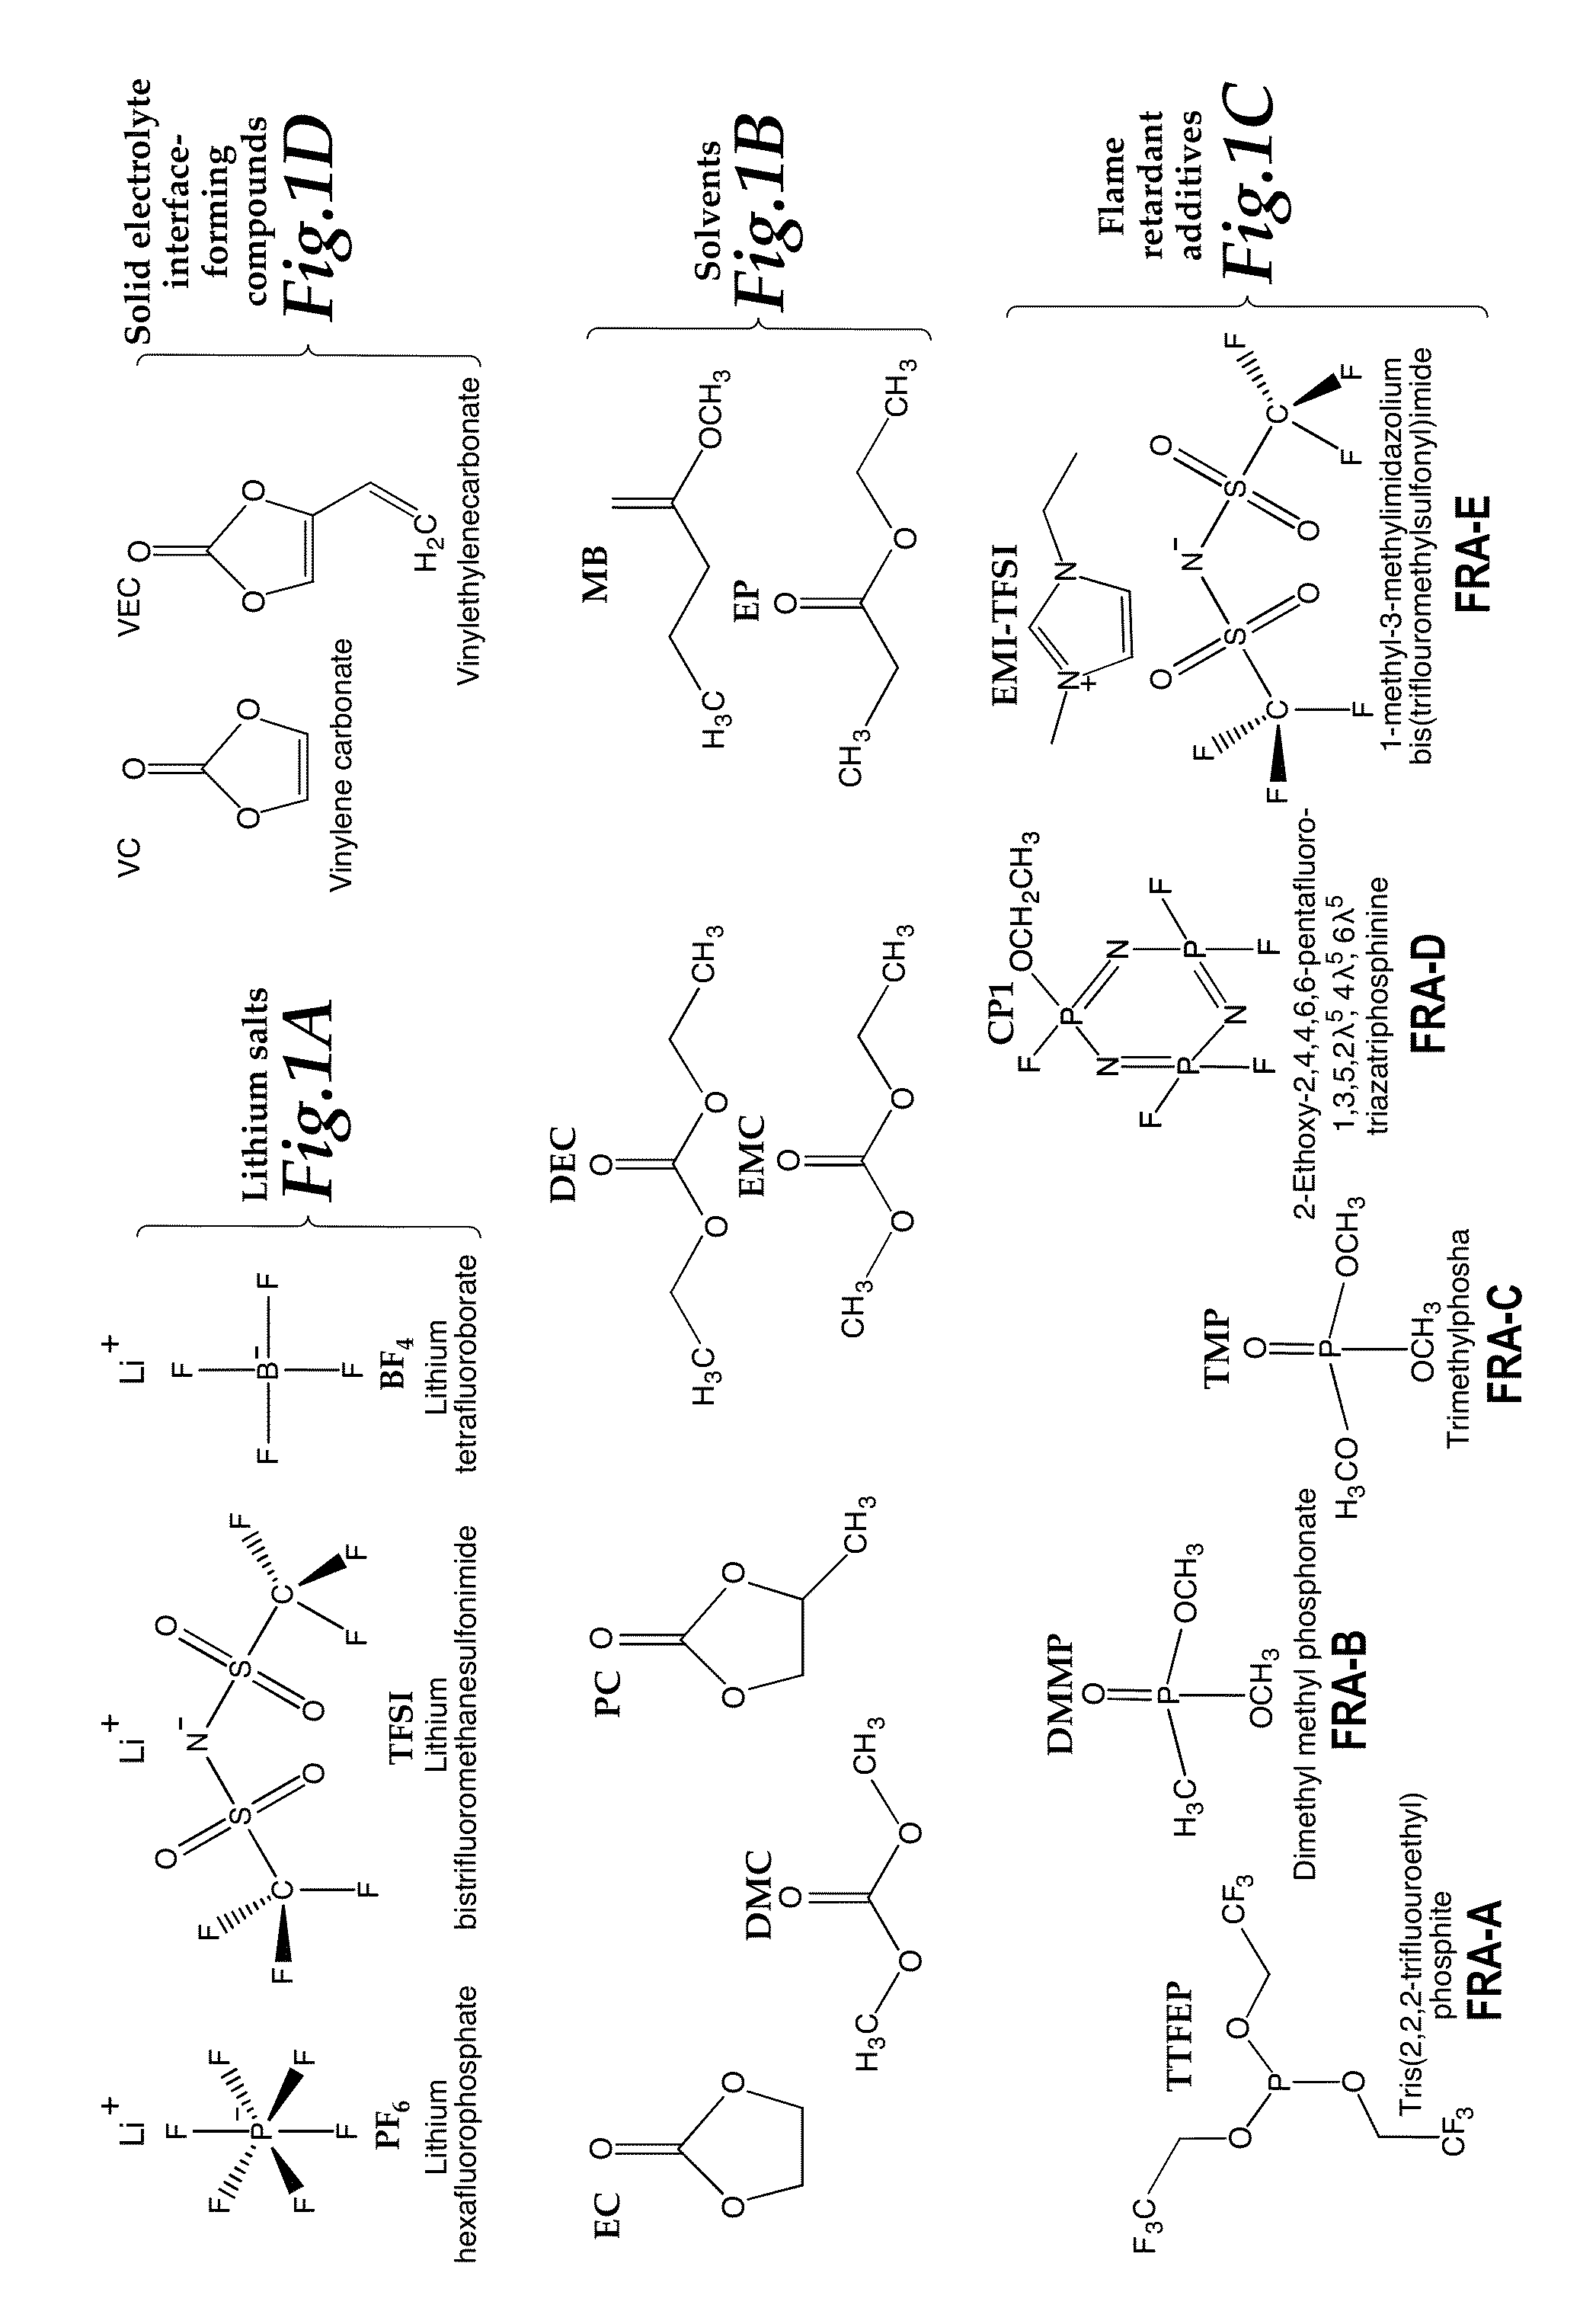 Electrolyte for Electrochemical Energy Storage Devices